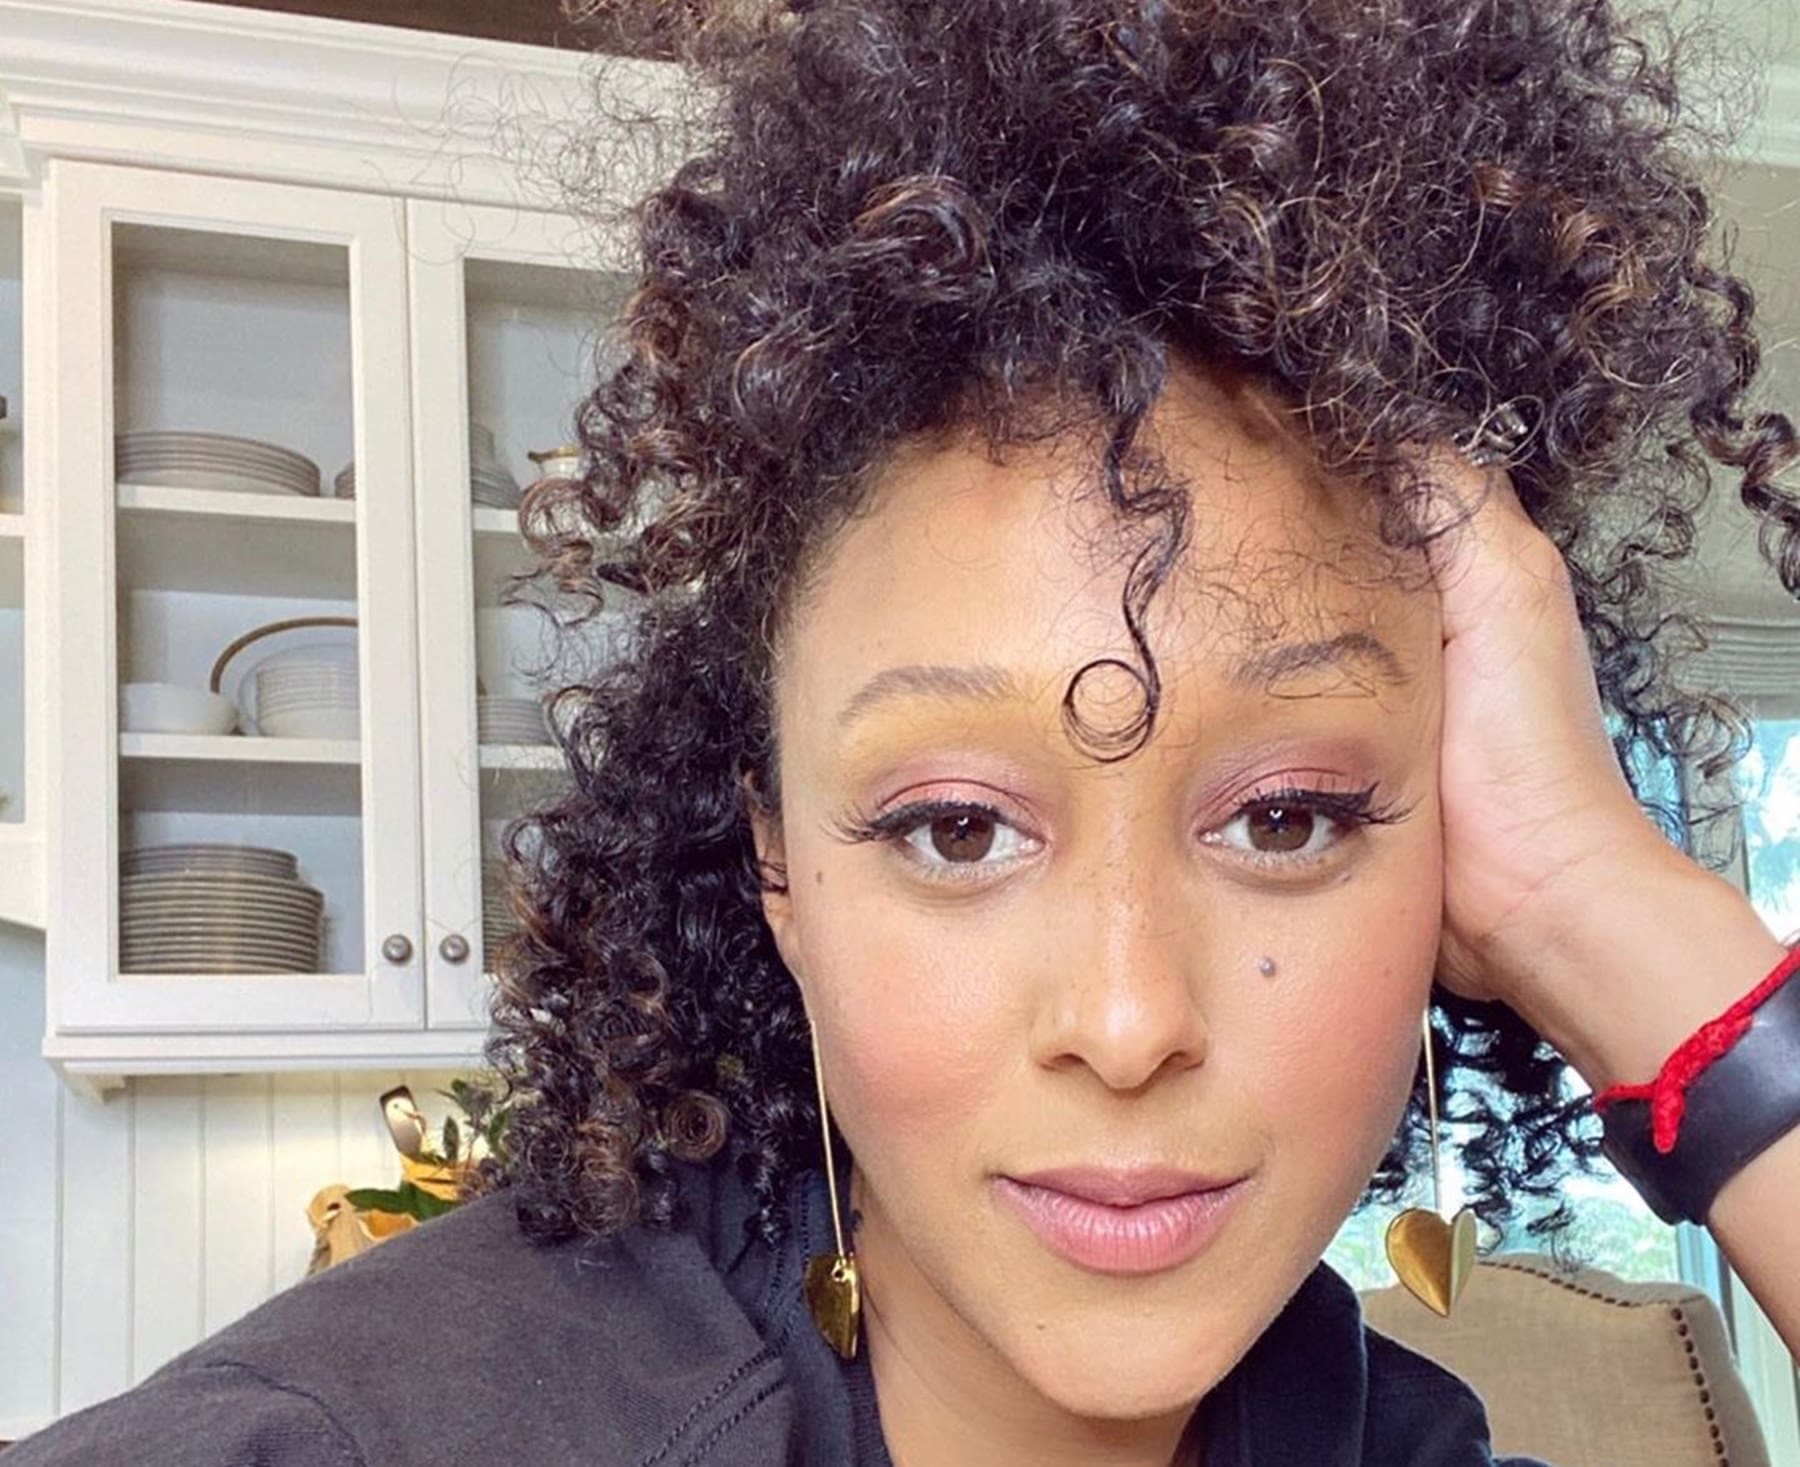 Tamera Mowry Housley Is More Radiant And Natural Than Ever In New Photos As She Celebrates A Big